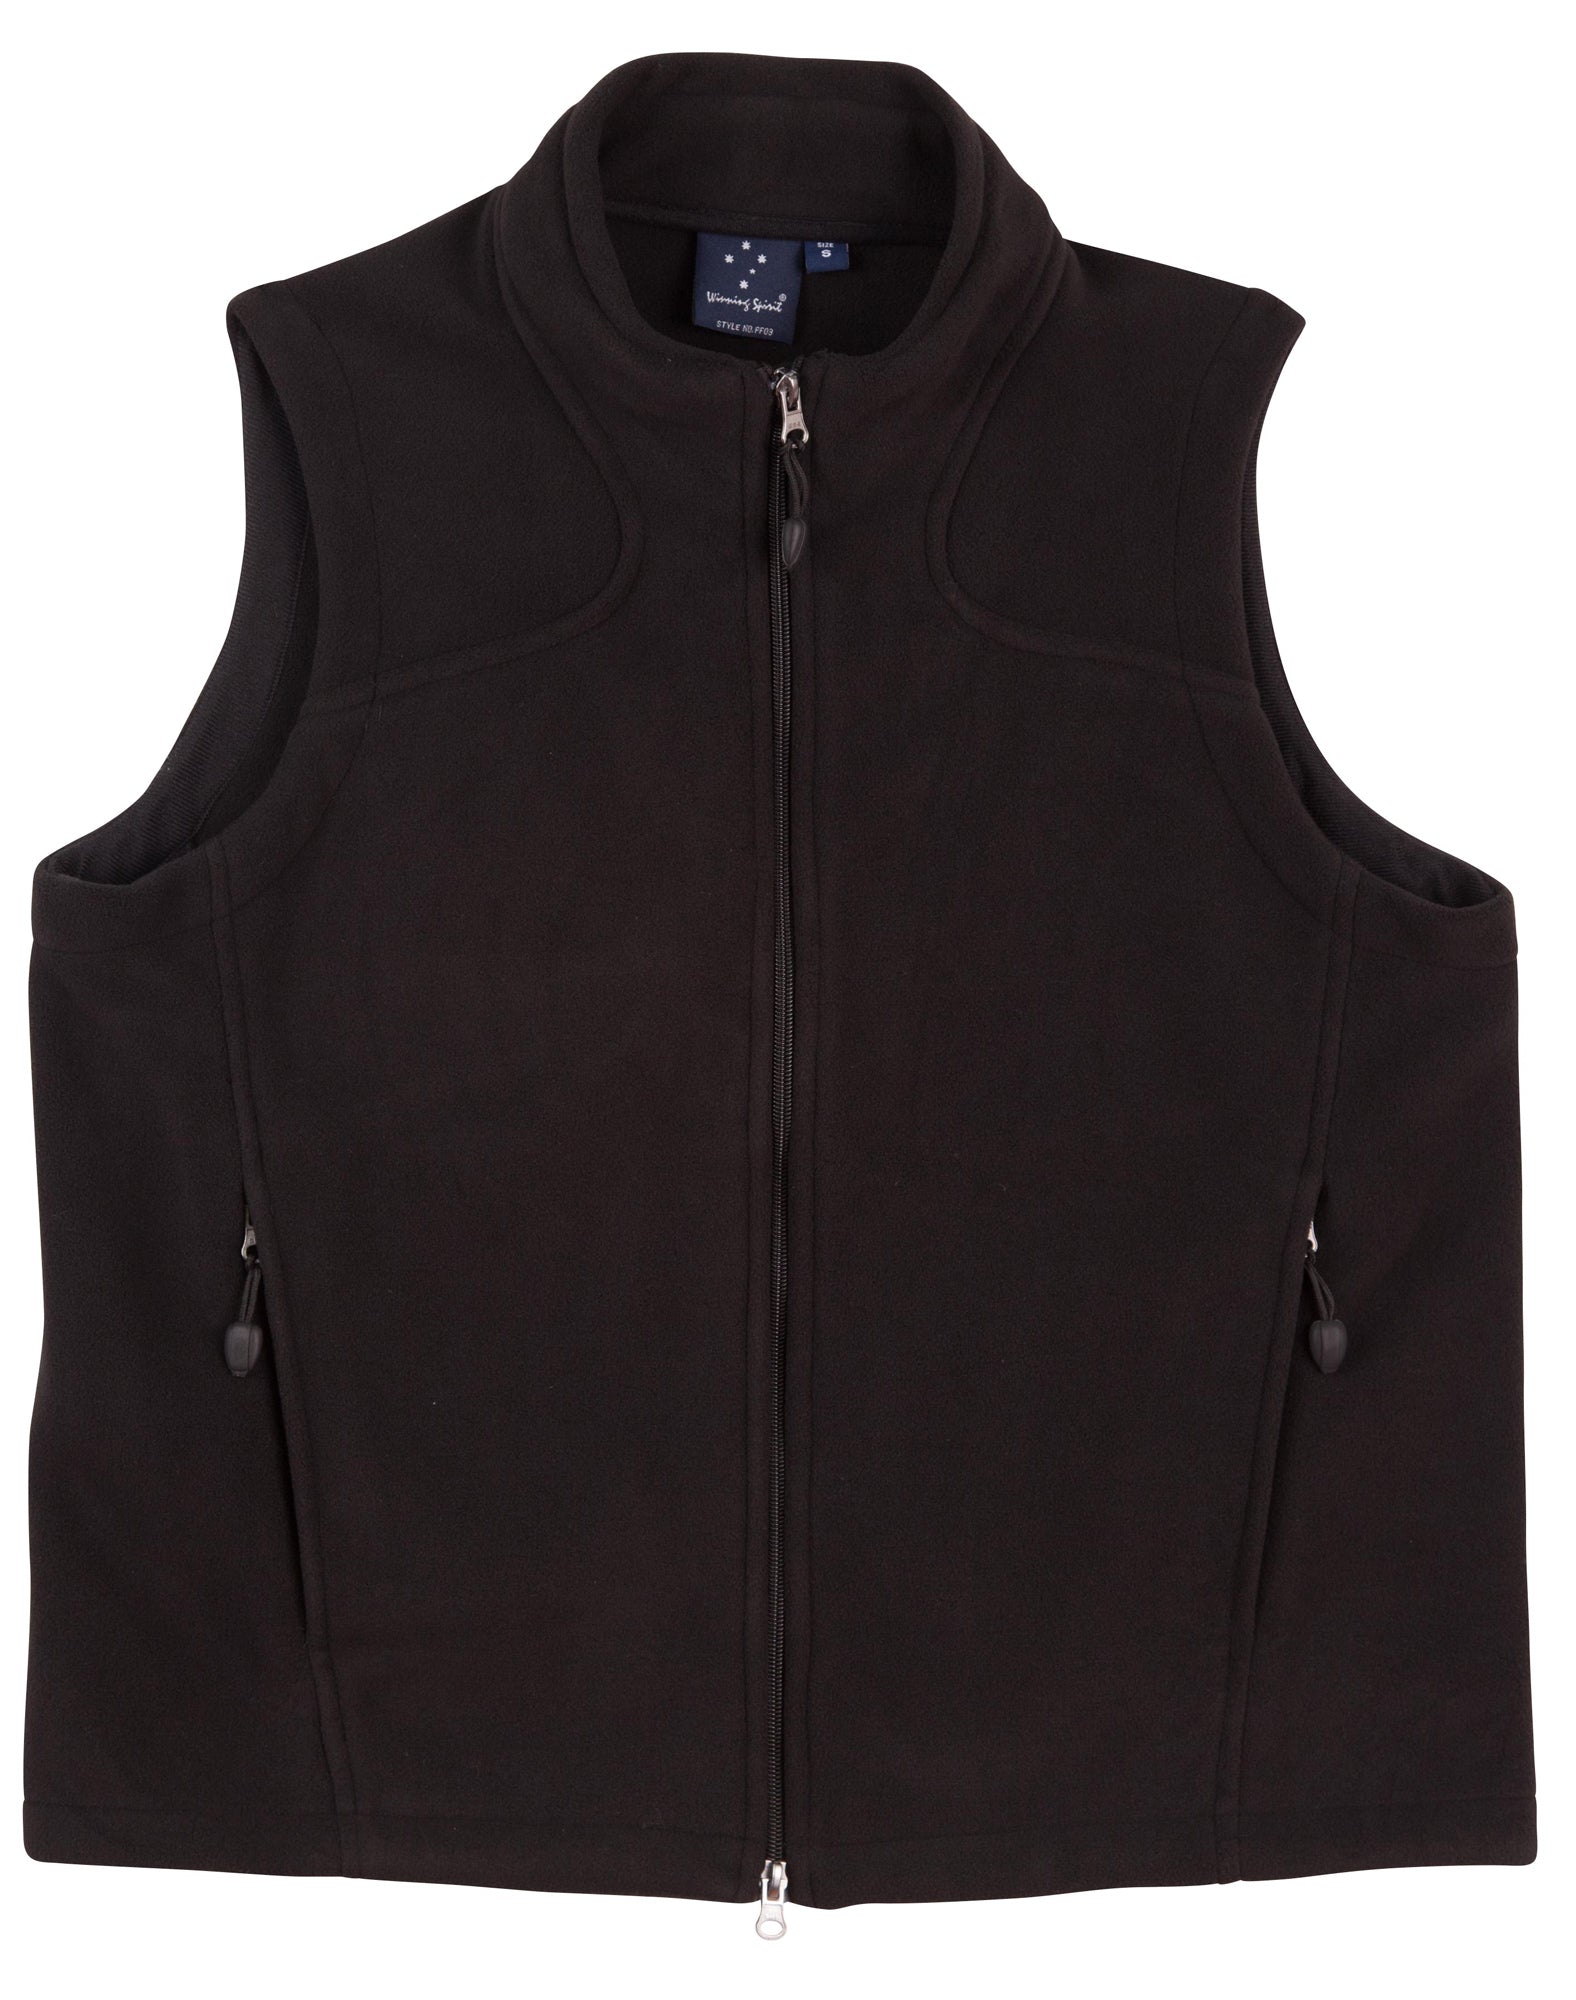 Bonded Fleece Vest - made by AIW